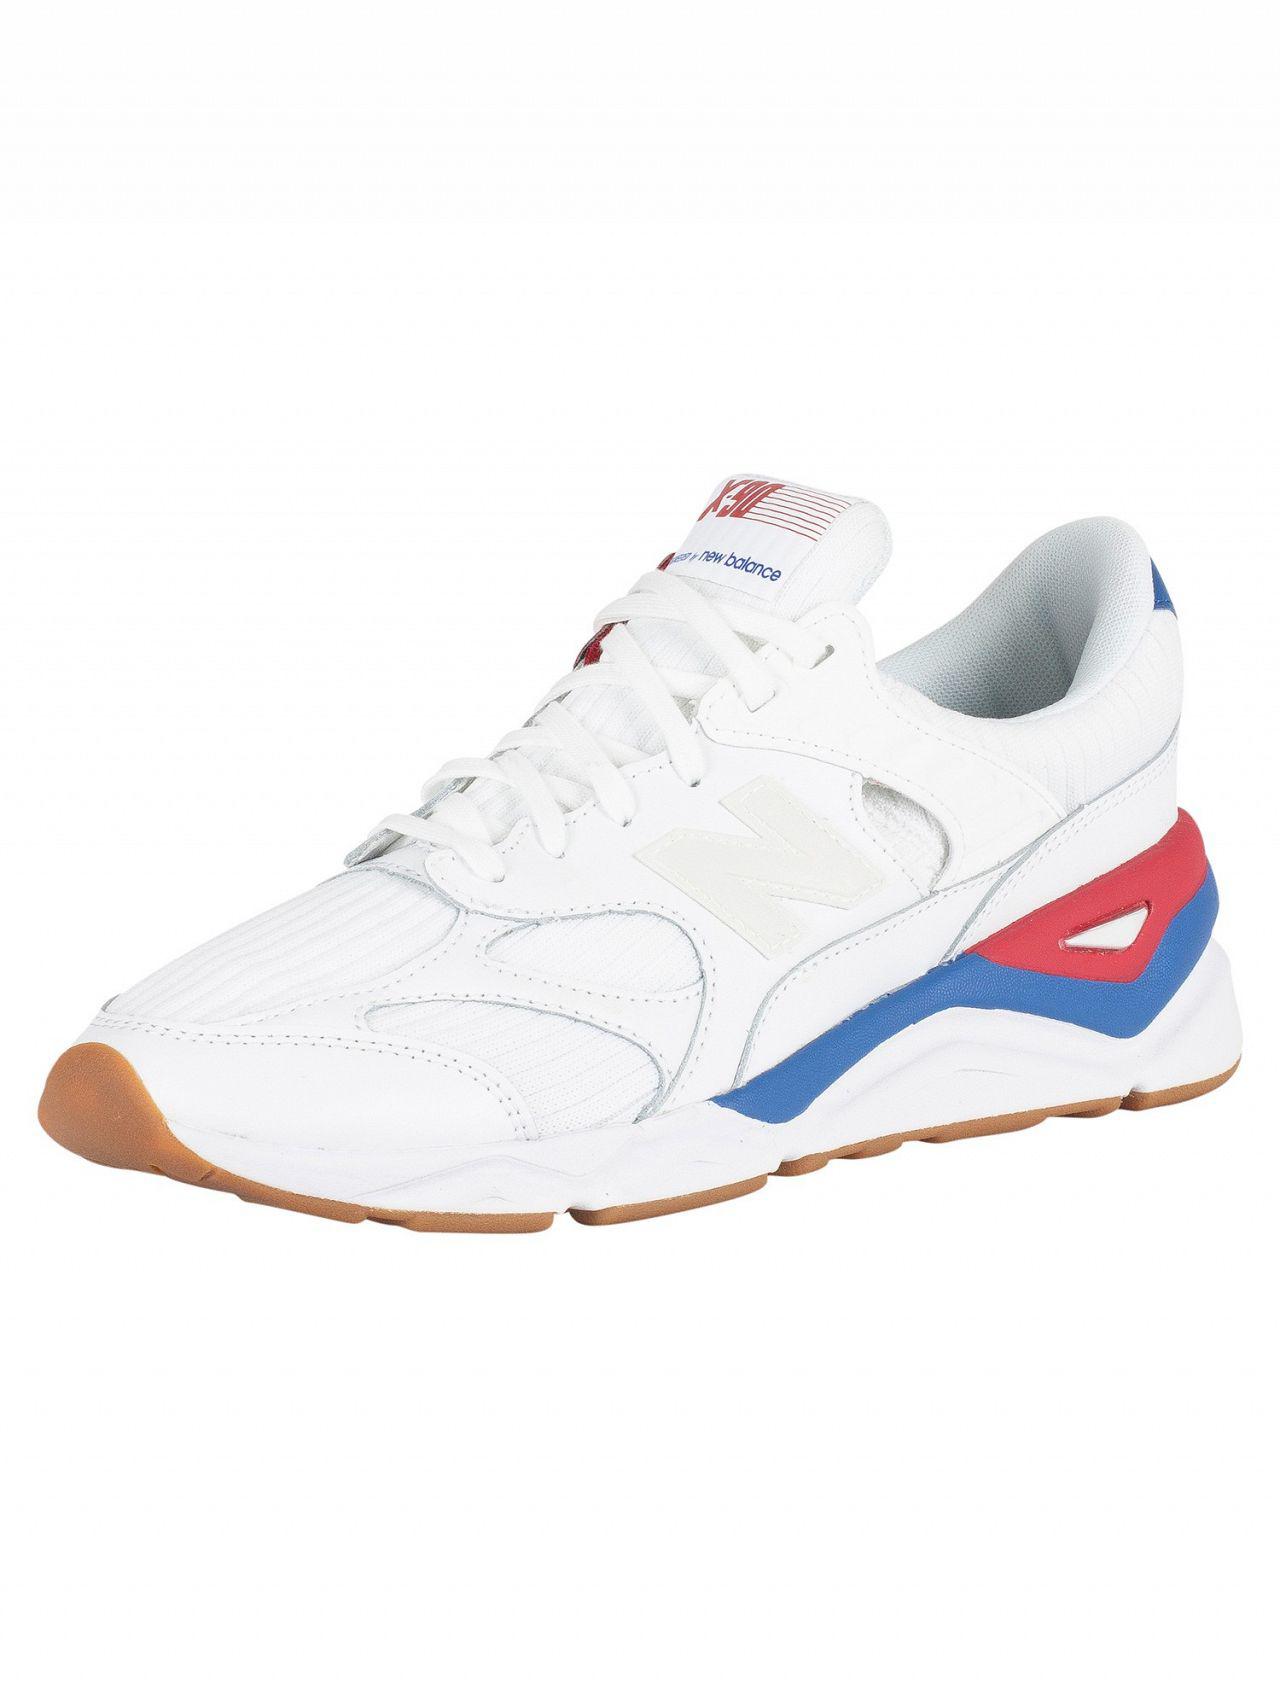 new balance red white and blue sneakers 9c4beb